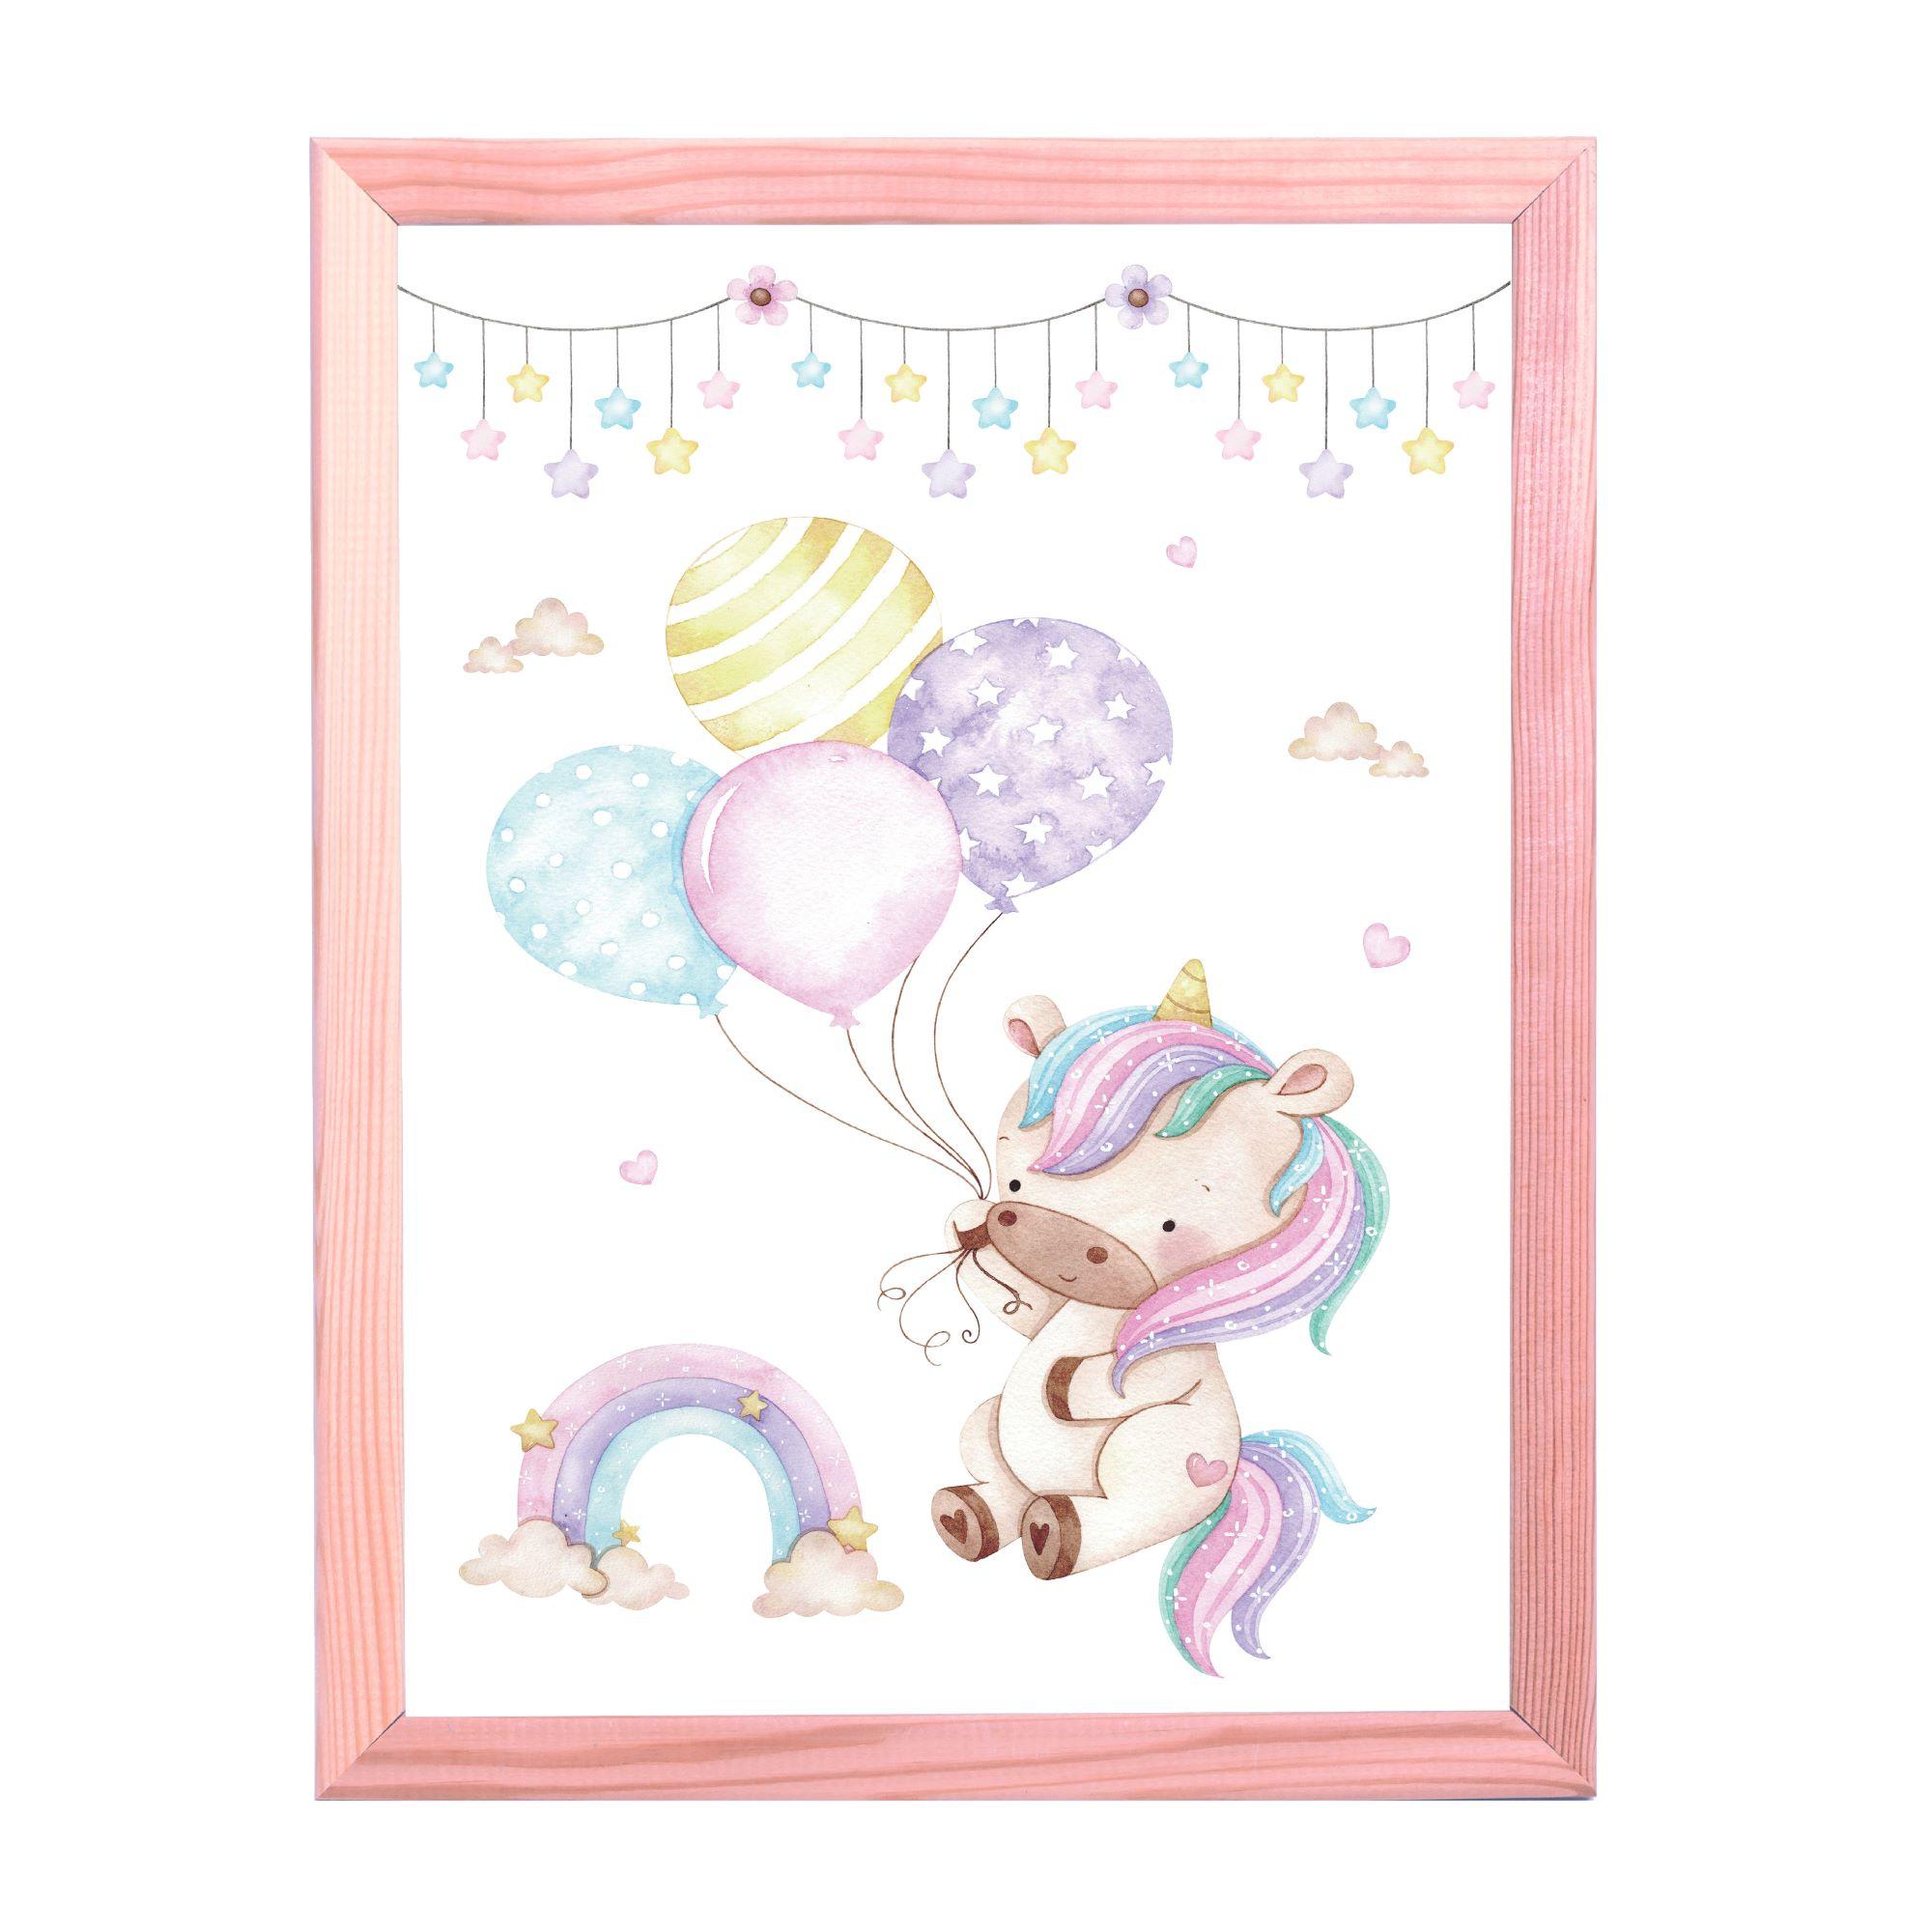 Unicorn Print - Up and Away' Perfect for Unicorn Themed Bedroom,Nursery,New Baby,Christening Gift